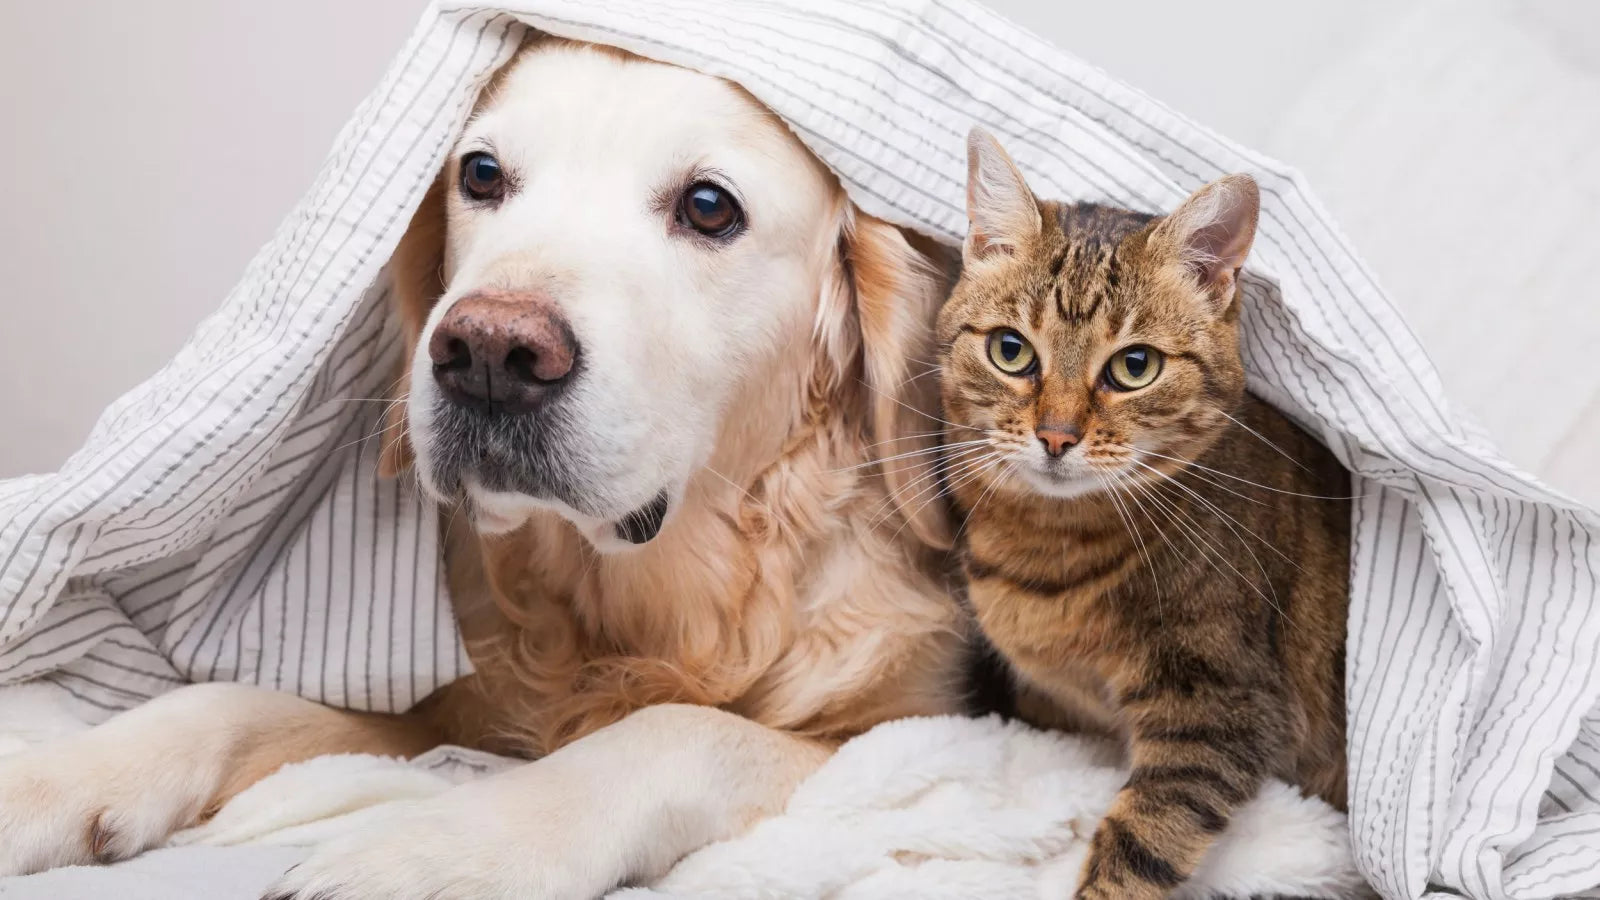 7 Ways to Get a Dog and Cat to Coexist